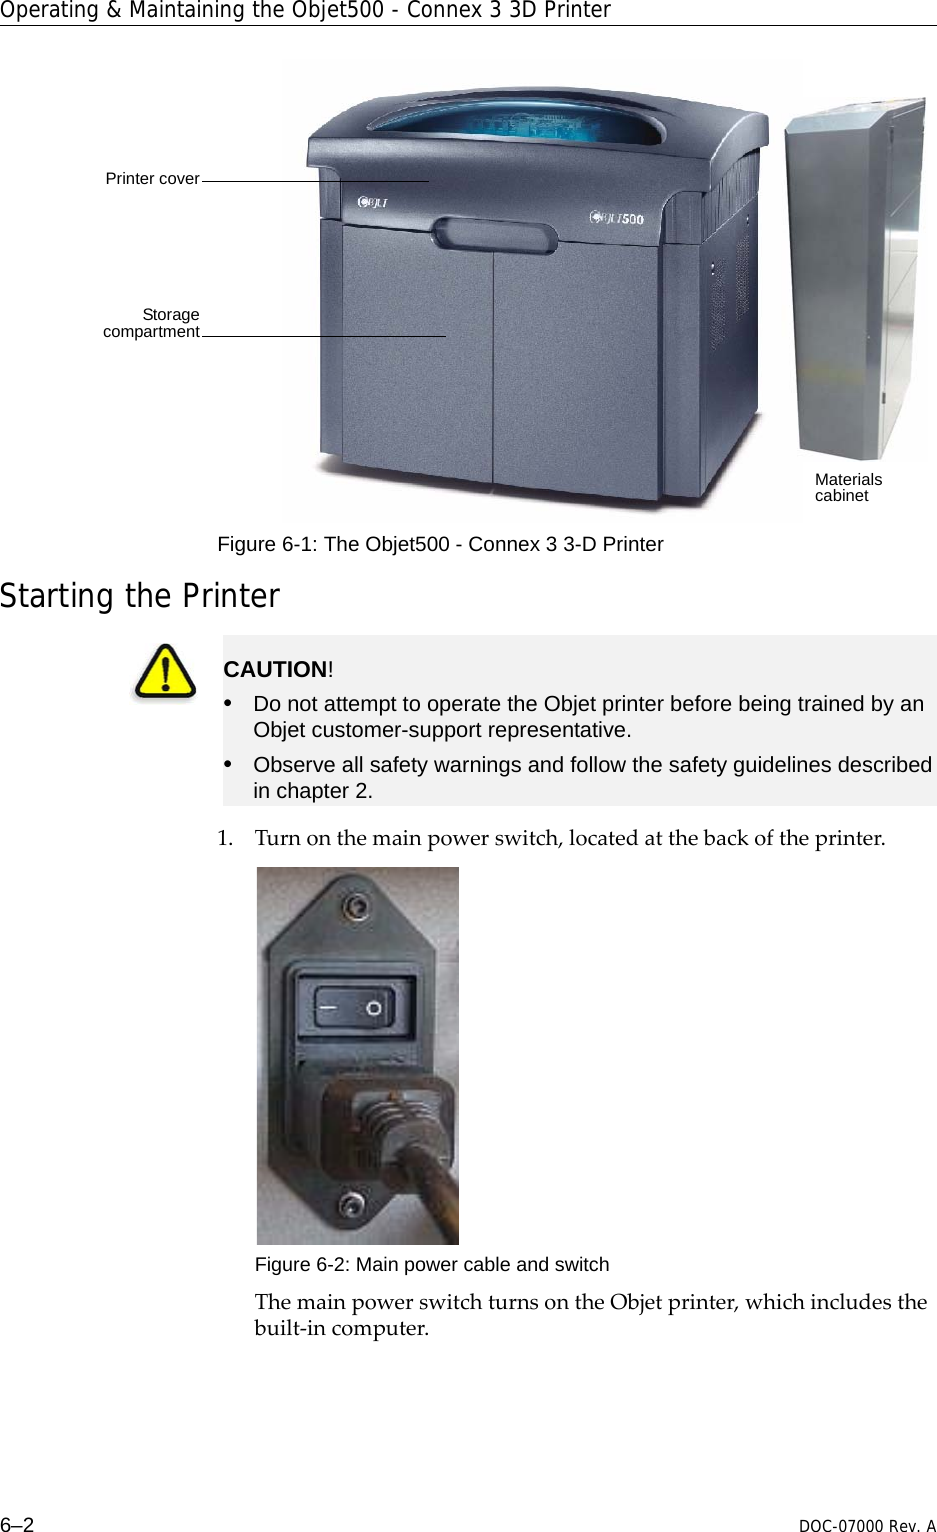 Operating &amp; Maintaining the Objet500 - Connex 3 3D Printer6–2 DOC-07000 Rev. AFigure 6-1: The Objet500 - Connex 3 3-D Printer Starting the Printer1. Turnonthemainpowerswitch,locatedatthebackoftheprinter.Figure 6-2: Main power cable and switchThemainpowerswitchturnsontheObjetprinter,whichincludesthebuilt‐incomputer.Printer coverStoragecompartmentMaterials cabinetCAUTION!•Do not attempt to operate the Objet printer before being trained by an Objet customer-support representative.•Observe all safety warnings and follow the safety guidelines described in chapter 2.